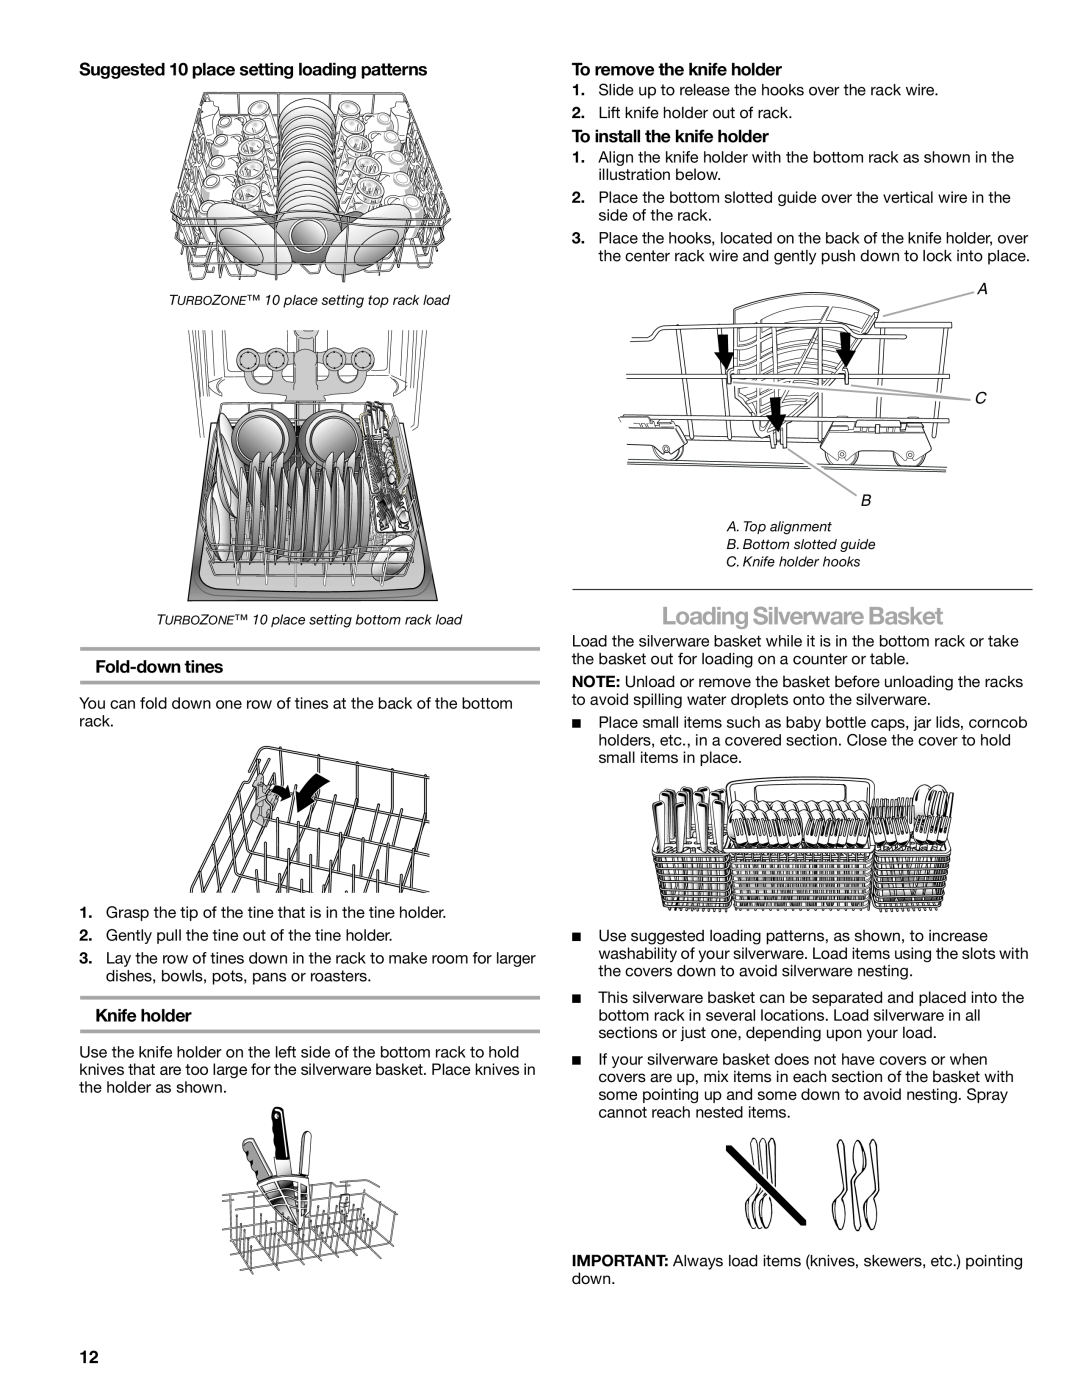 Kenmore 665.1378 Loading Silverware Basket, Suggested 10 place setting loading patterns, Fold-down tines, Knife holder 